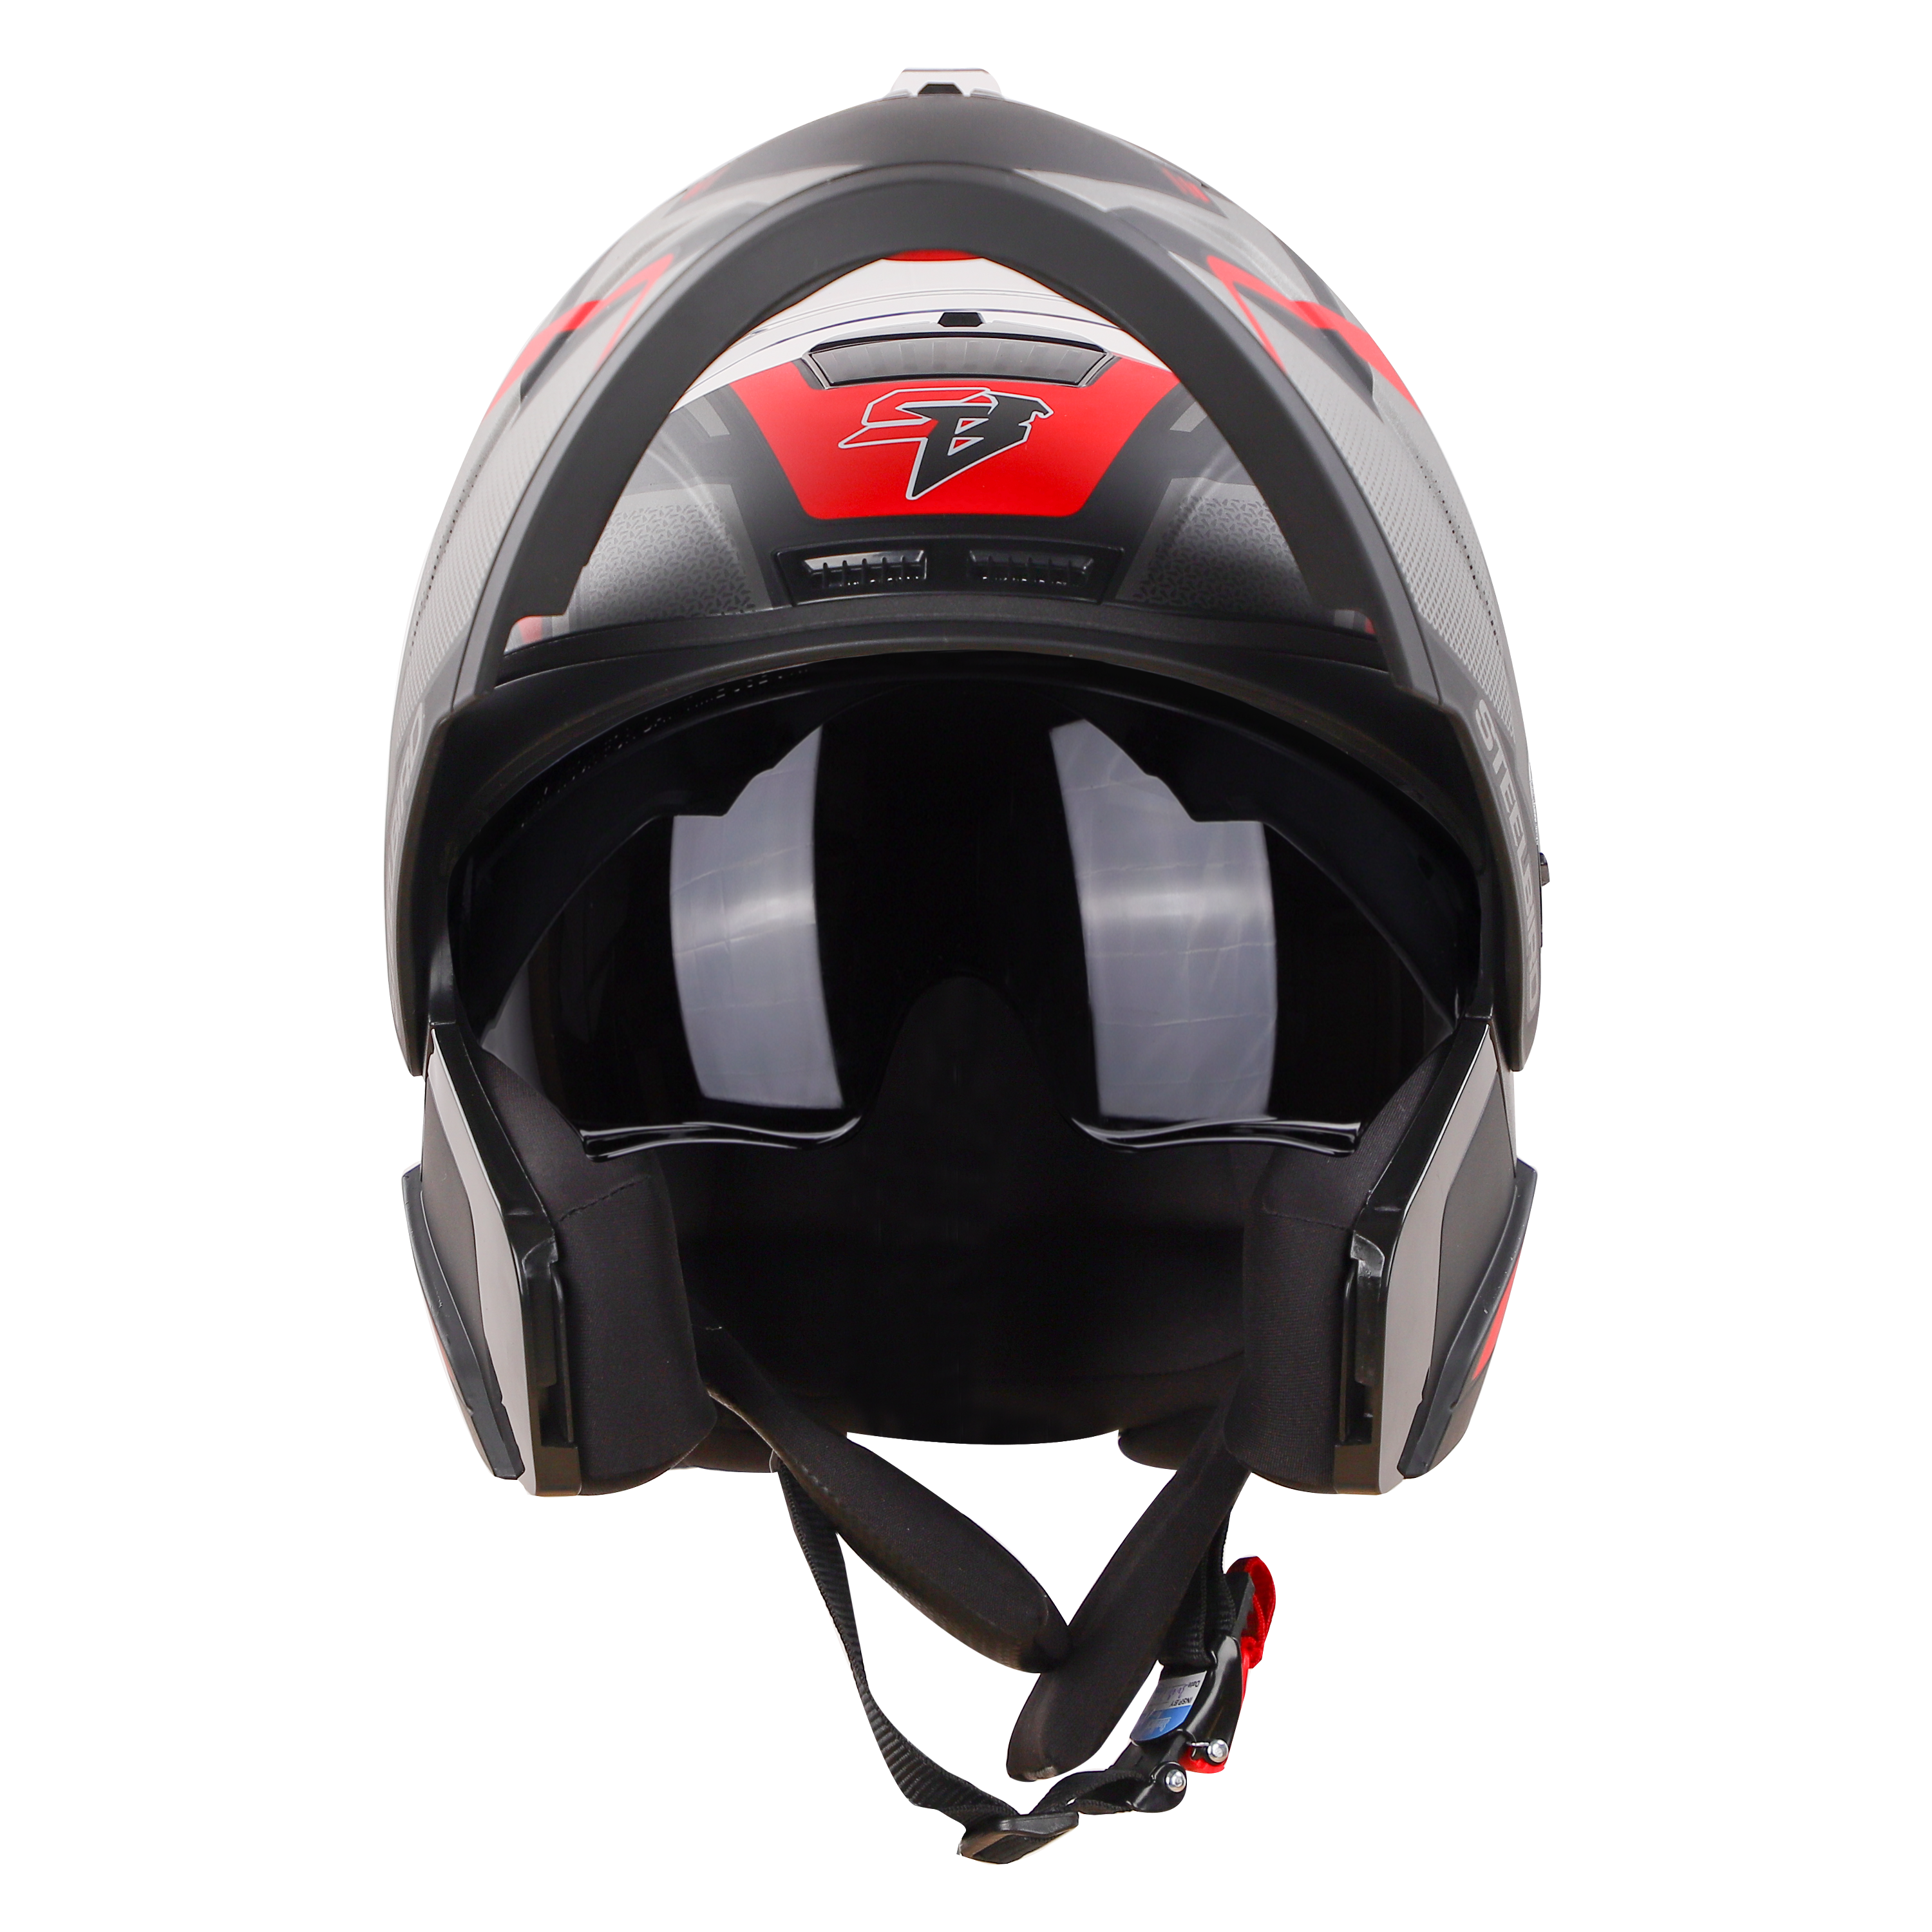 SBA-7 VERSATILE GLOSSY BLACK WITH RED (WITH INNER SUN SHIELD)